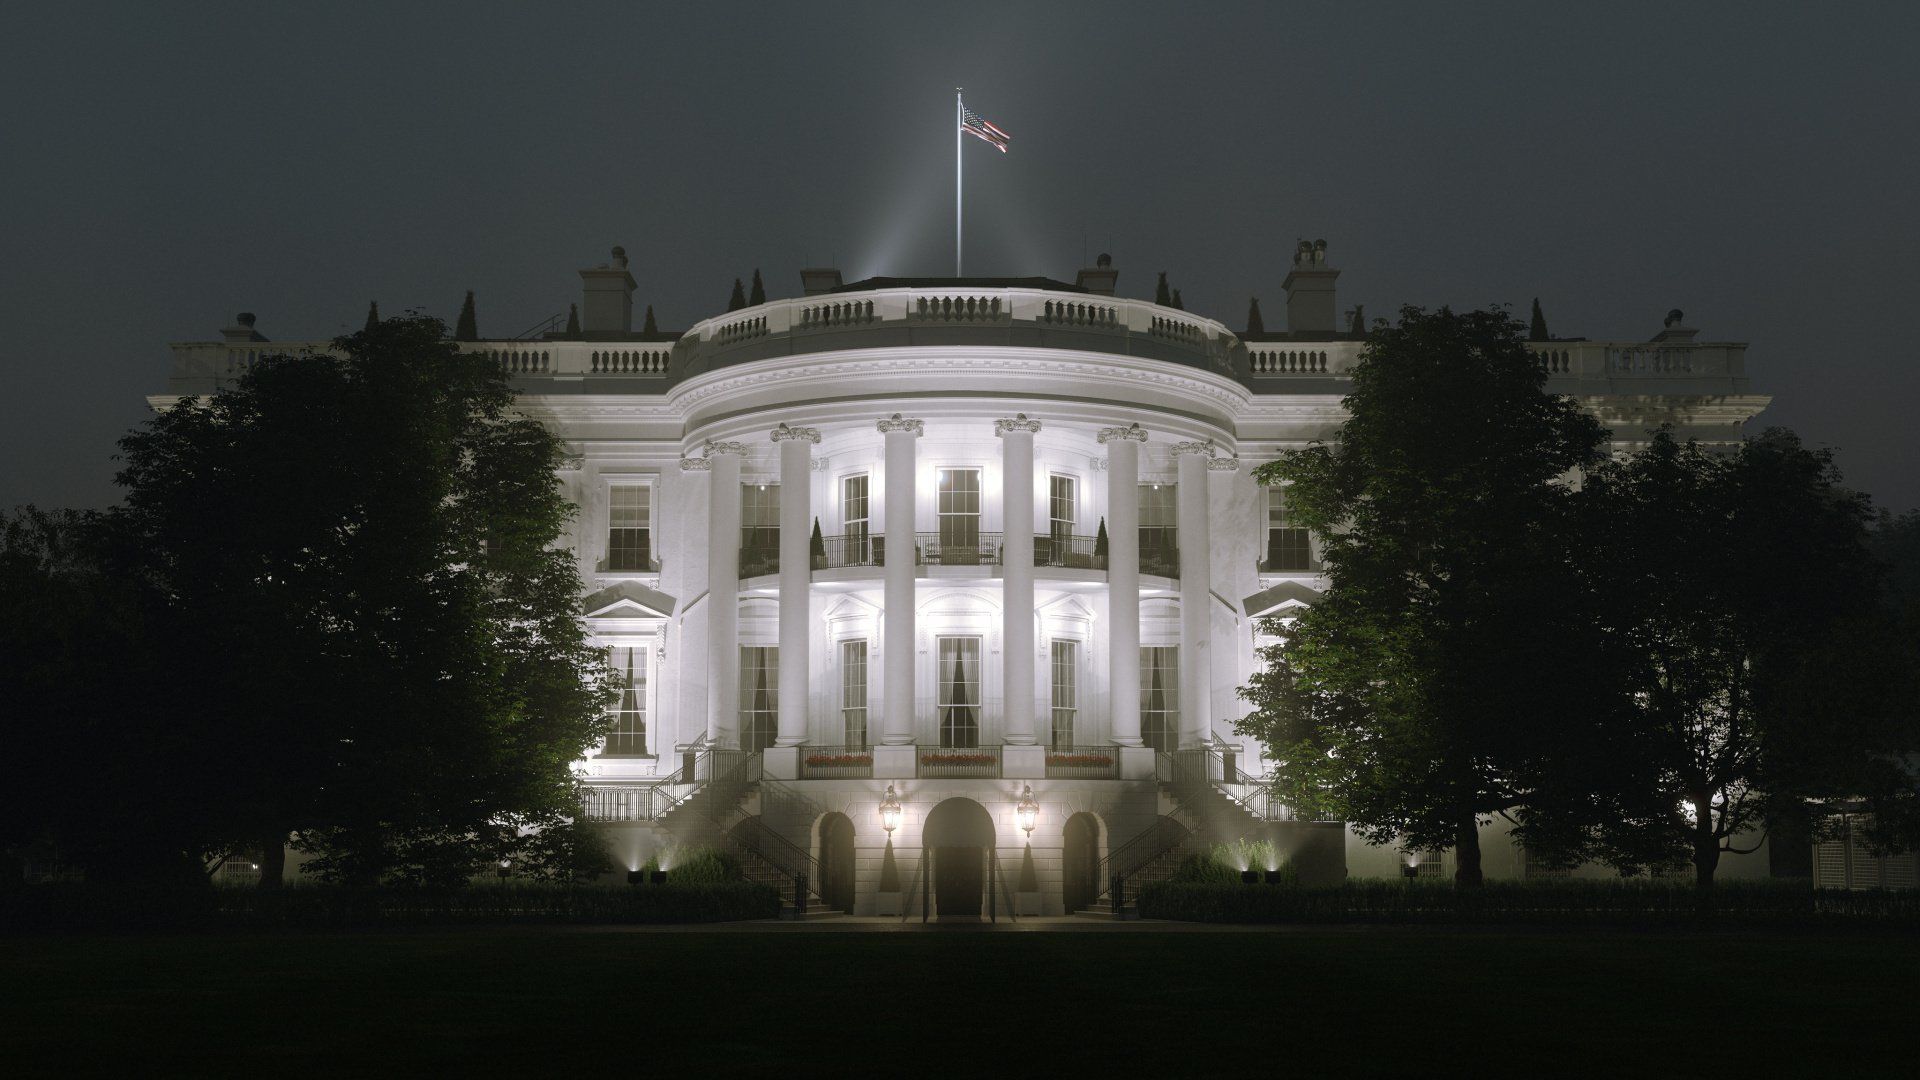 White House lit up at night - with trees